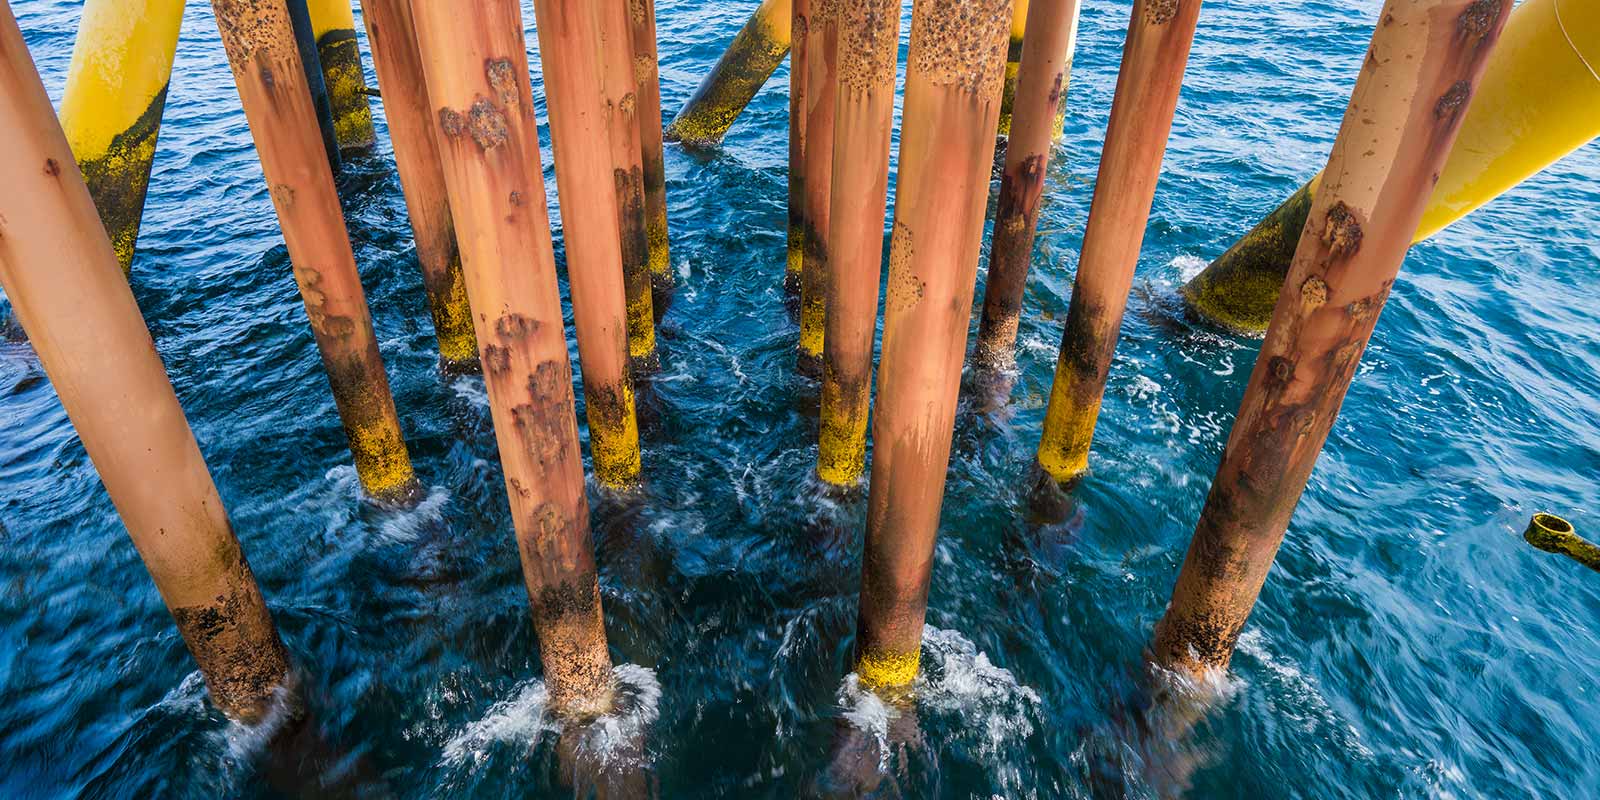 Metal poles that have been corroded by the ocean.